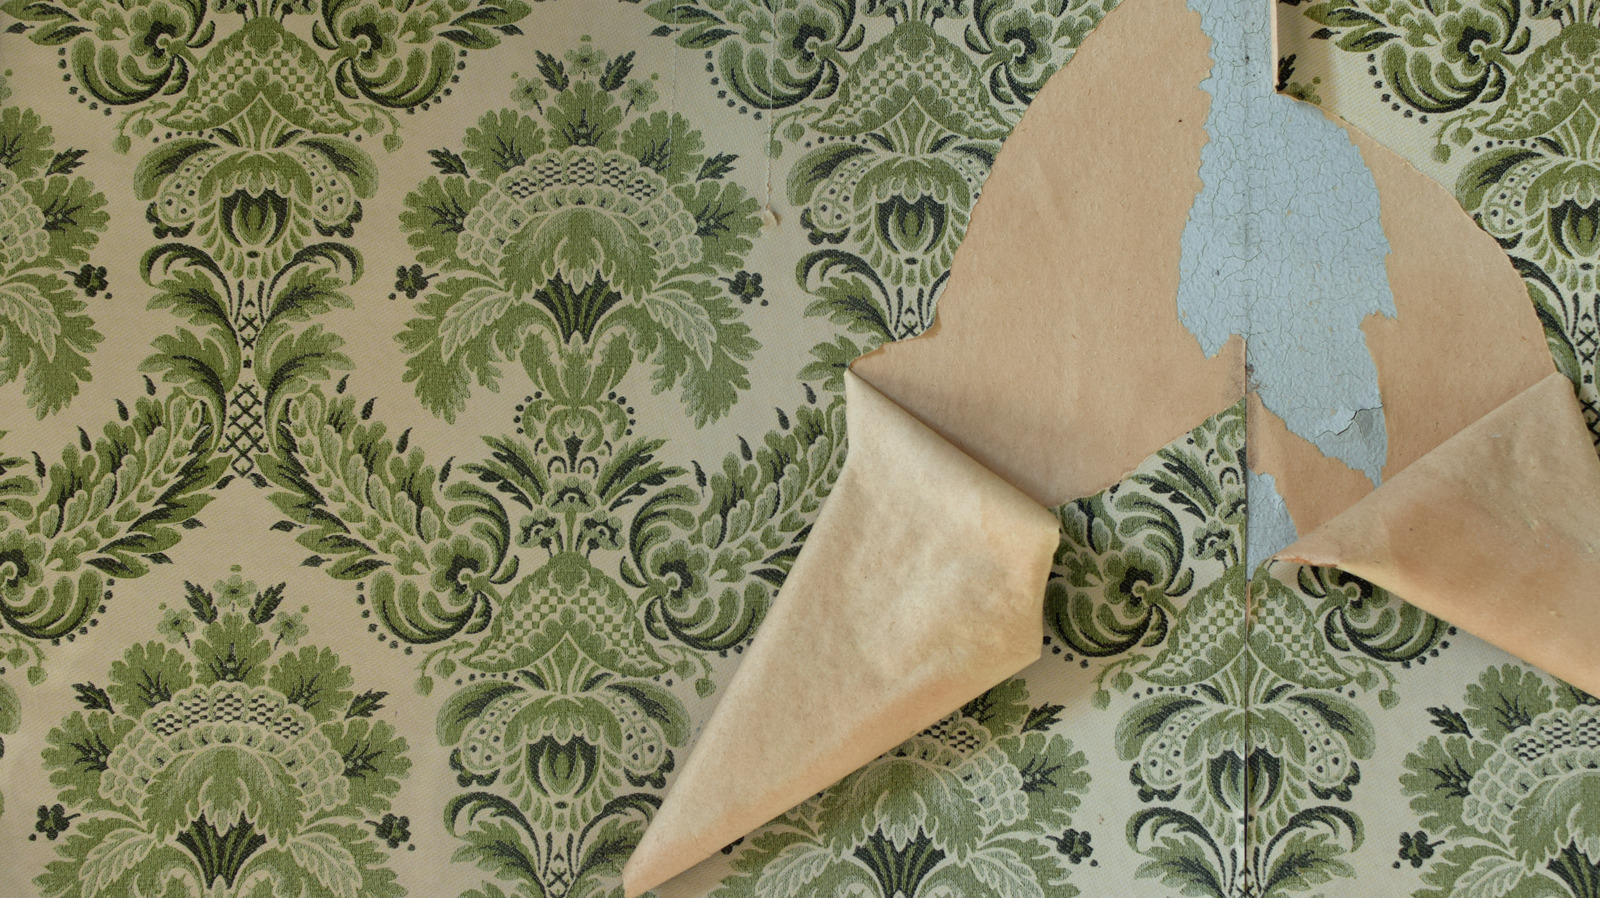 The 3 Step Process That Will Clean Up Your Disastrous Wallpaper